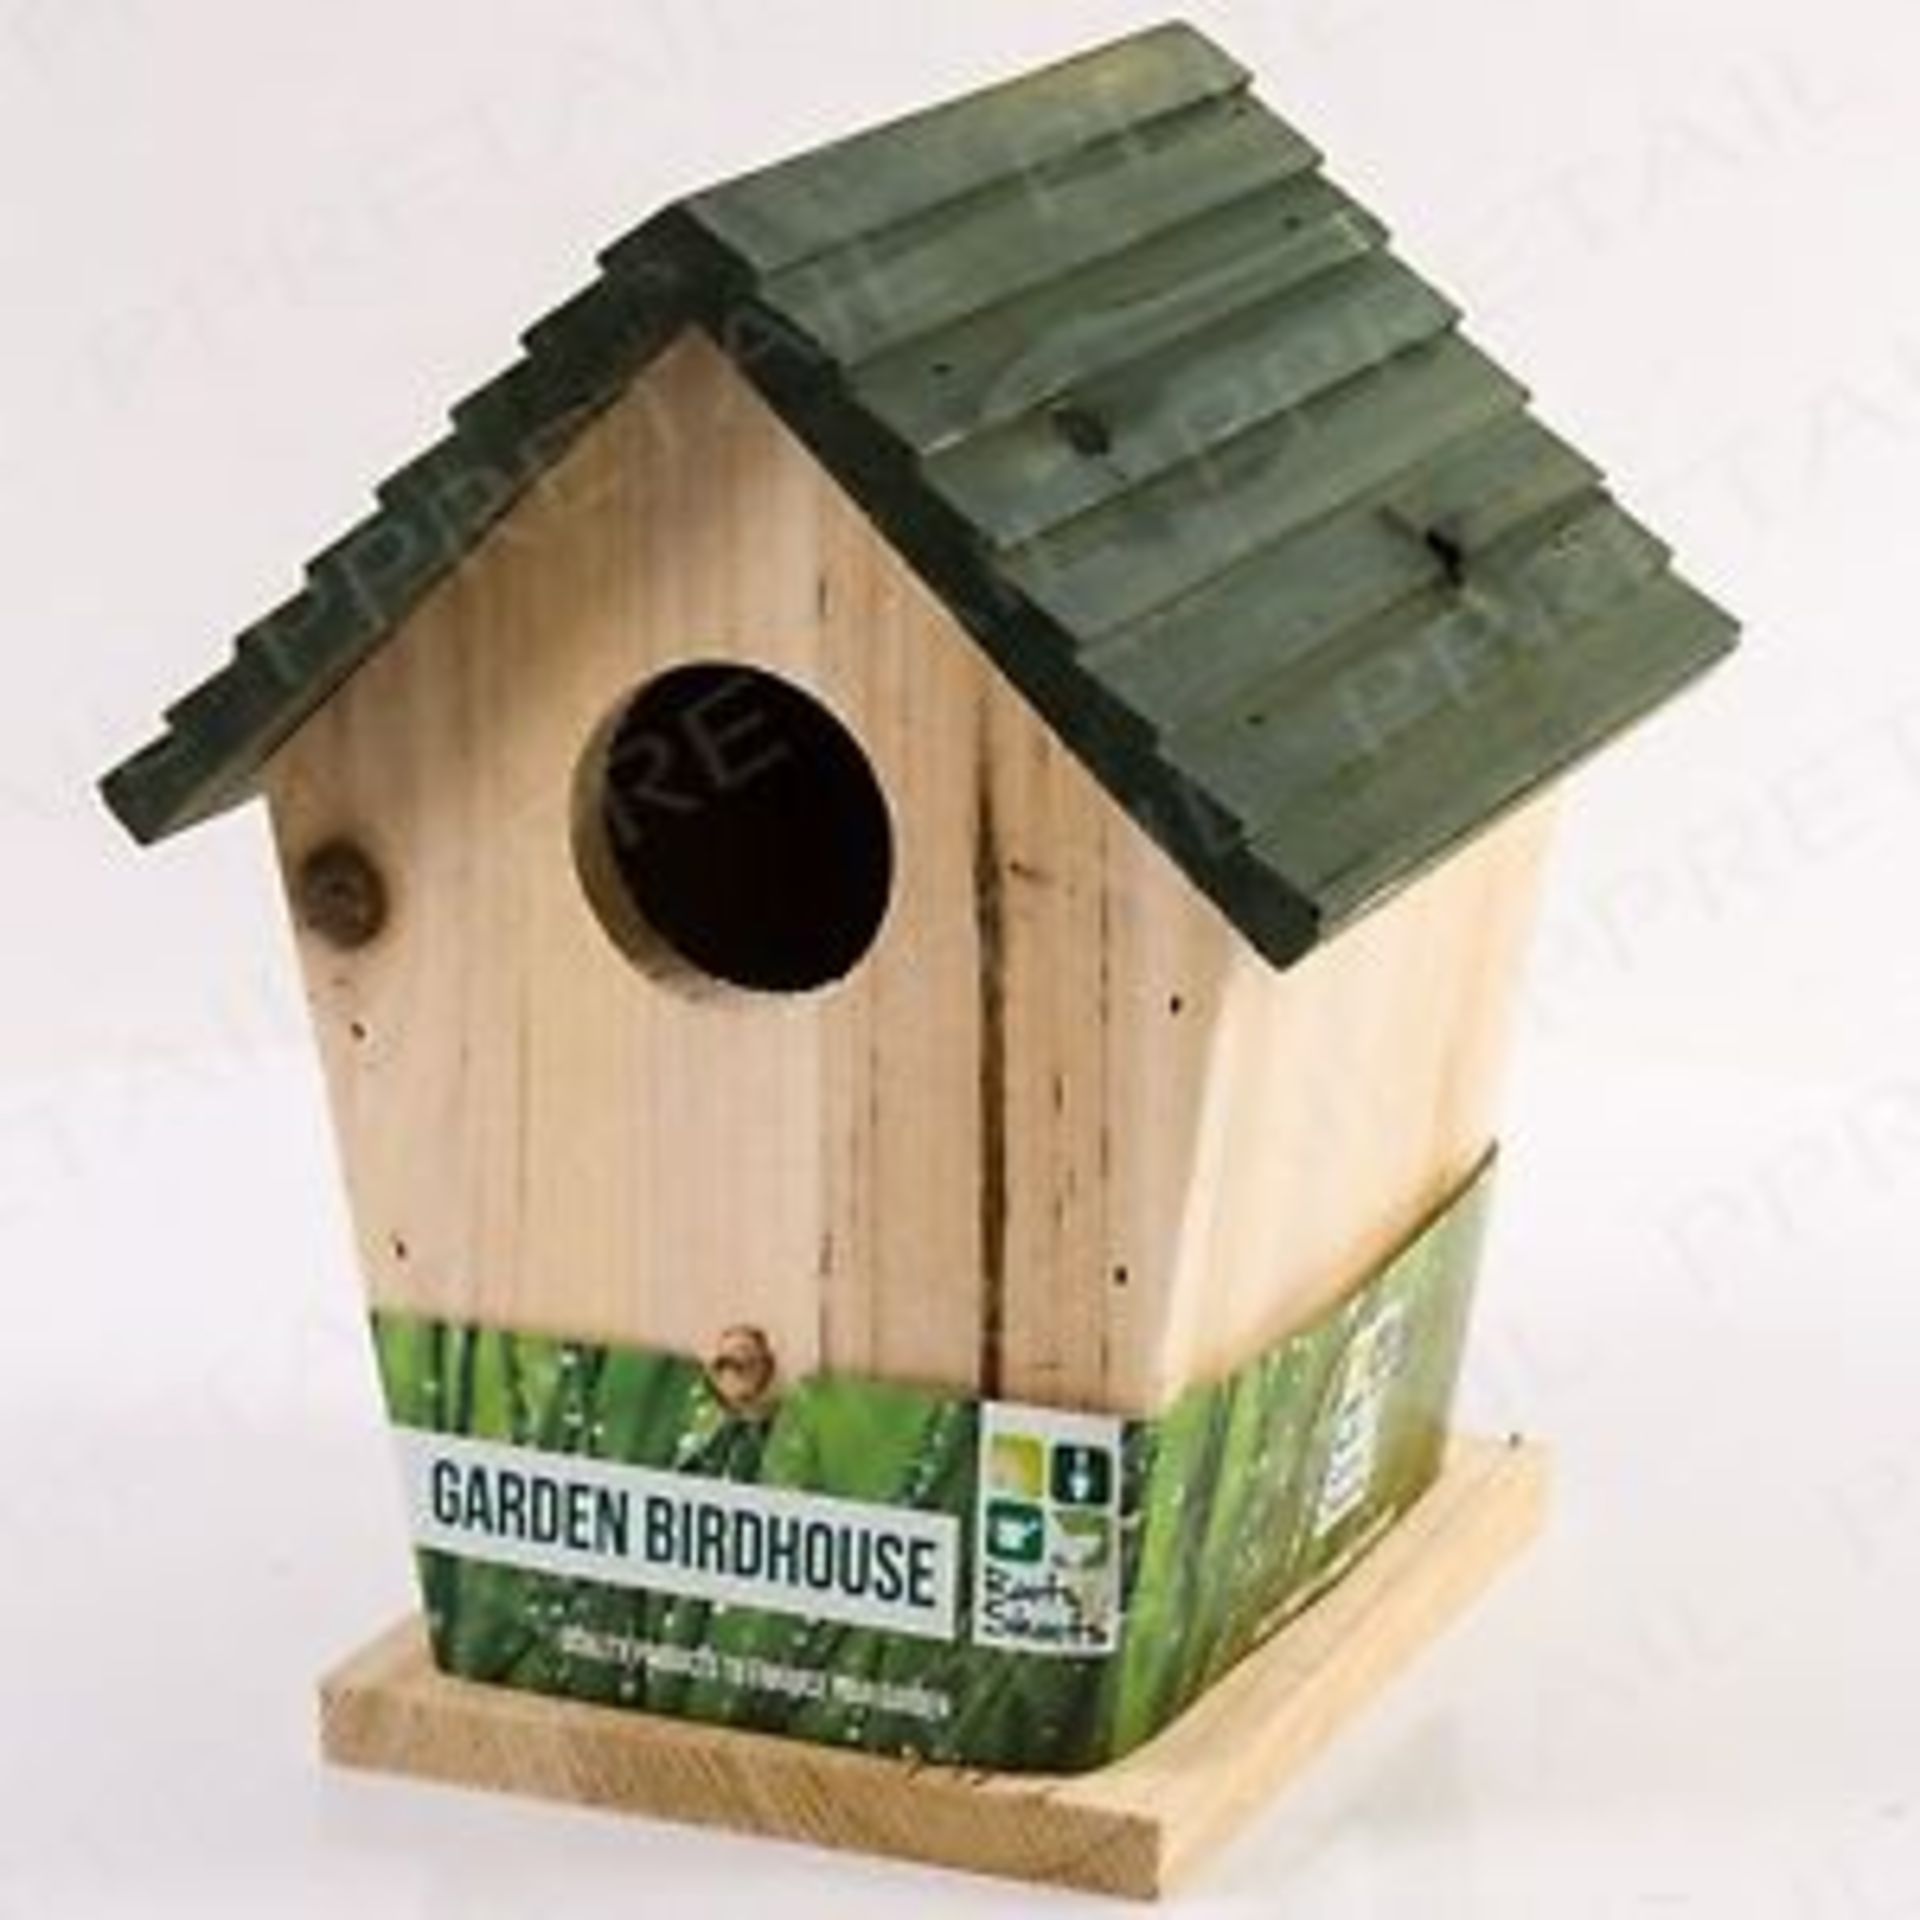 V *TRADE QTY* Brand New Wooden Birdhouse With Pitched Roof And Perch X 8 YOUR BID PRICE TO BE